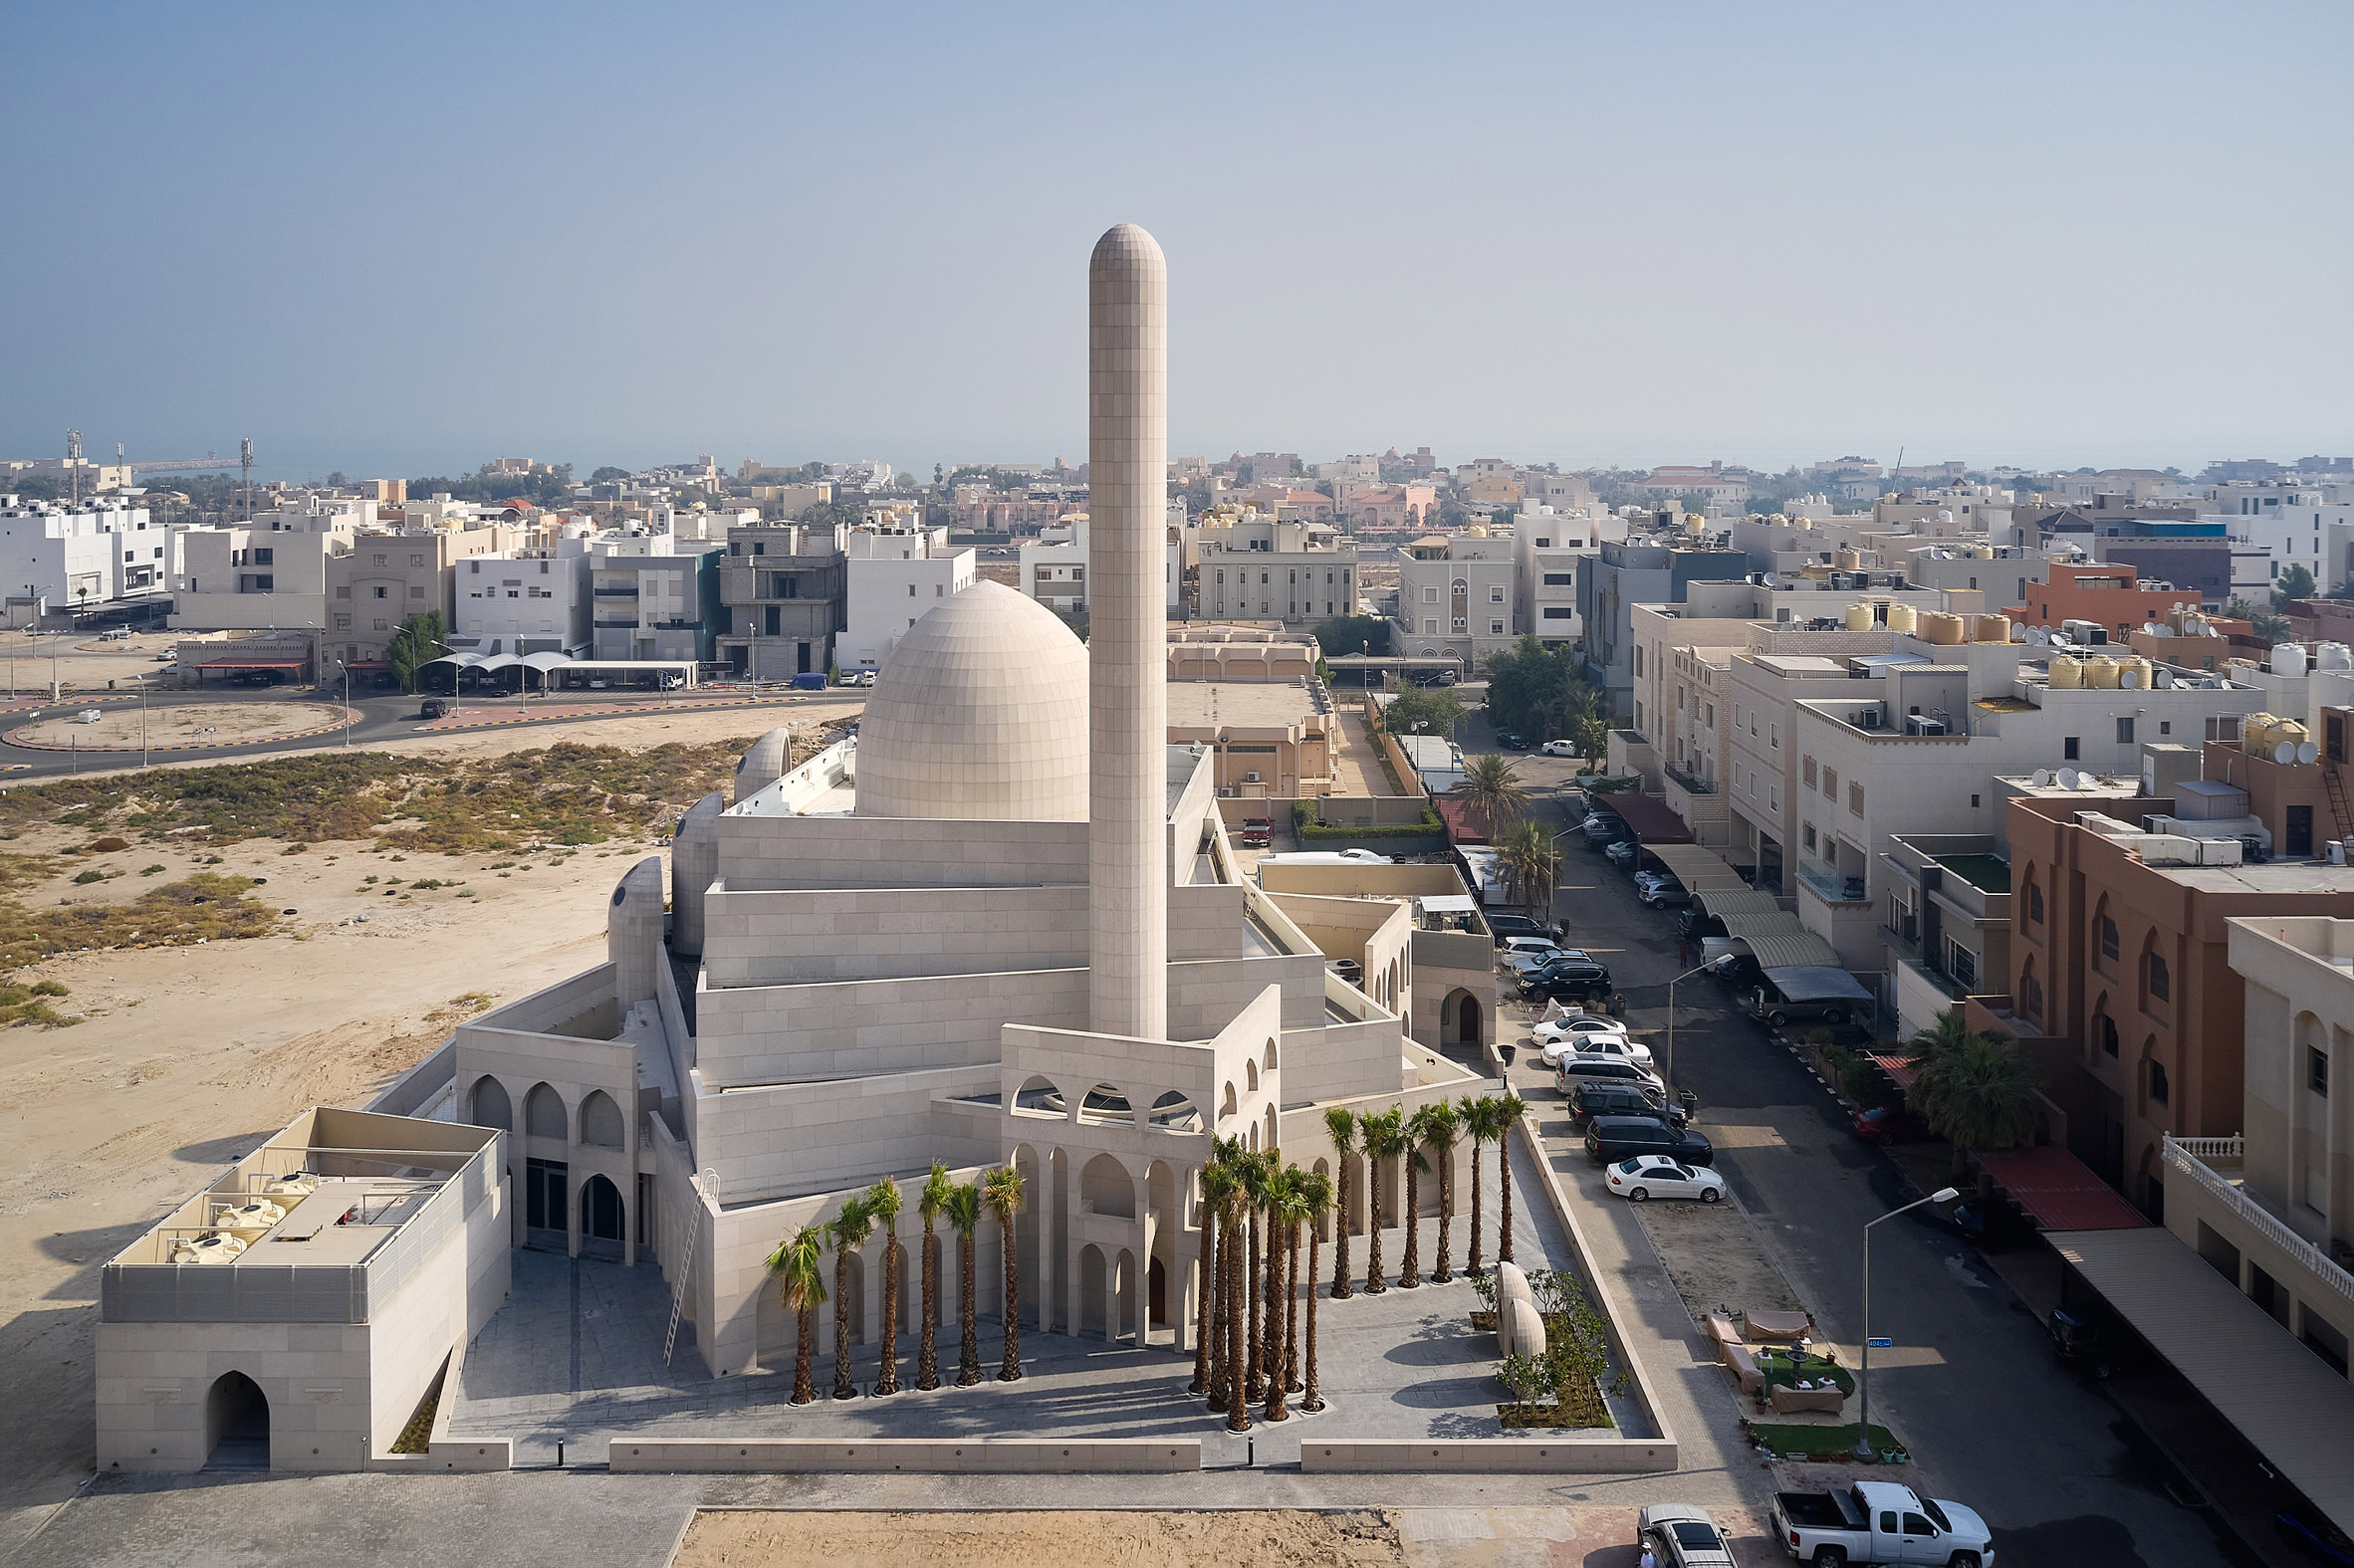 The minaret marks out the direction toward the religious centre